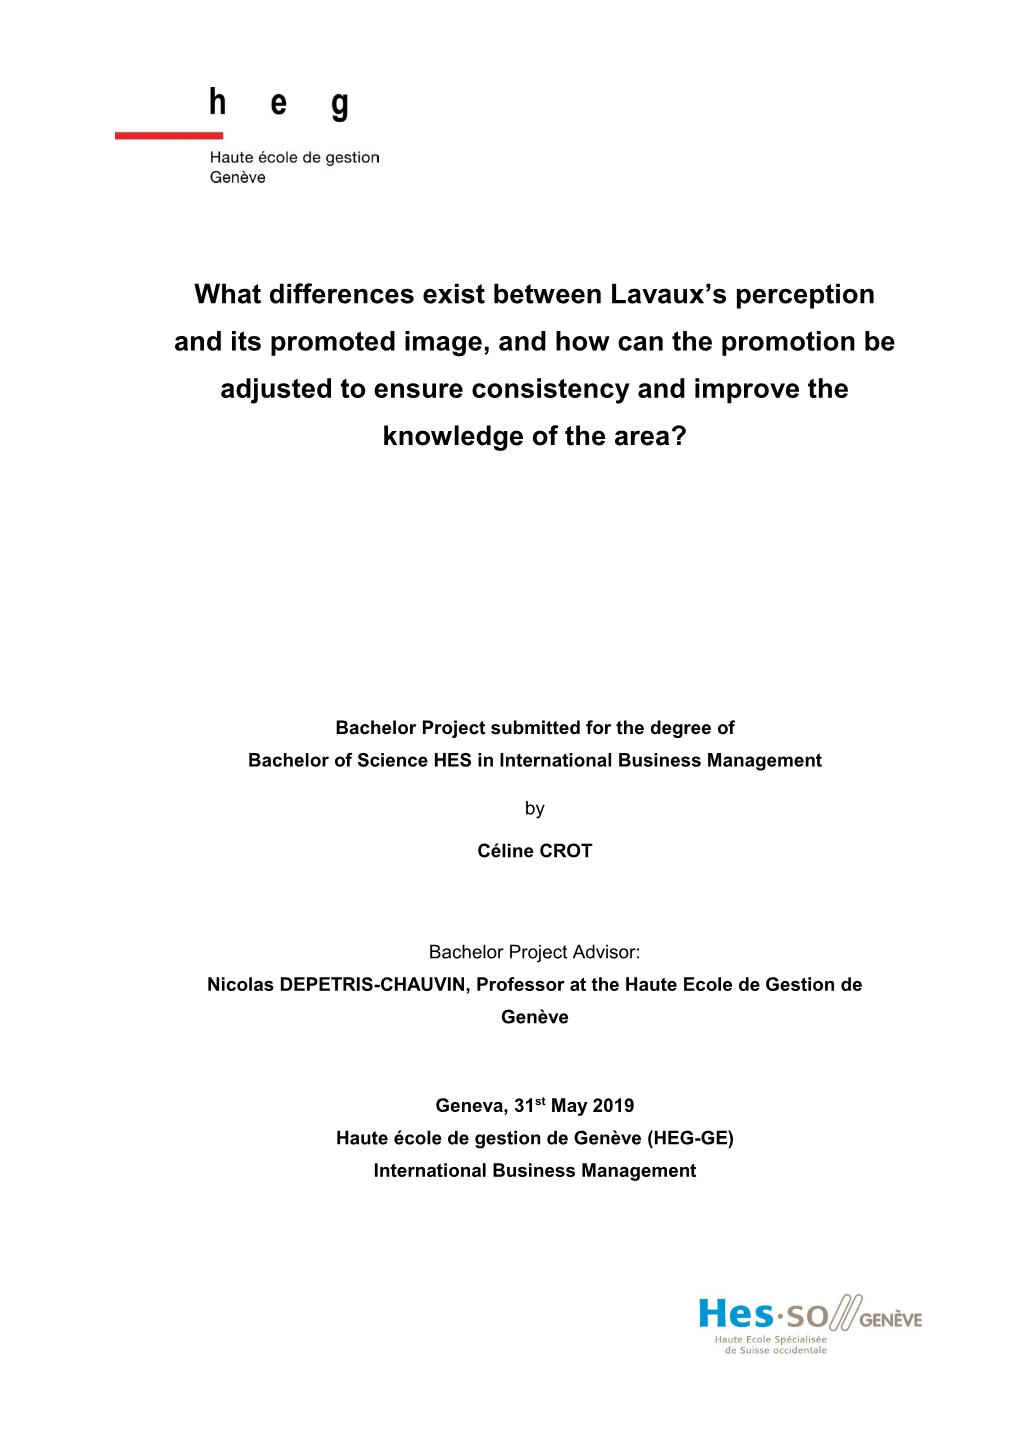 What Differences Exist Between Lavaux's Perception and Its